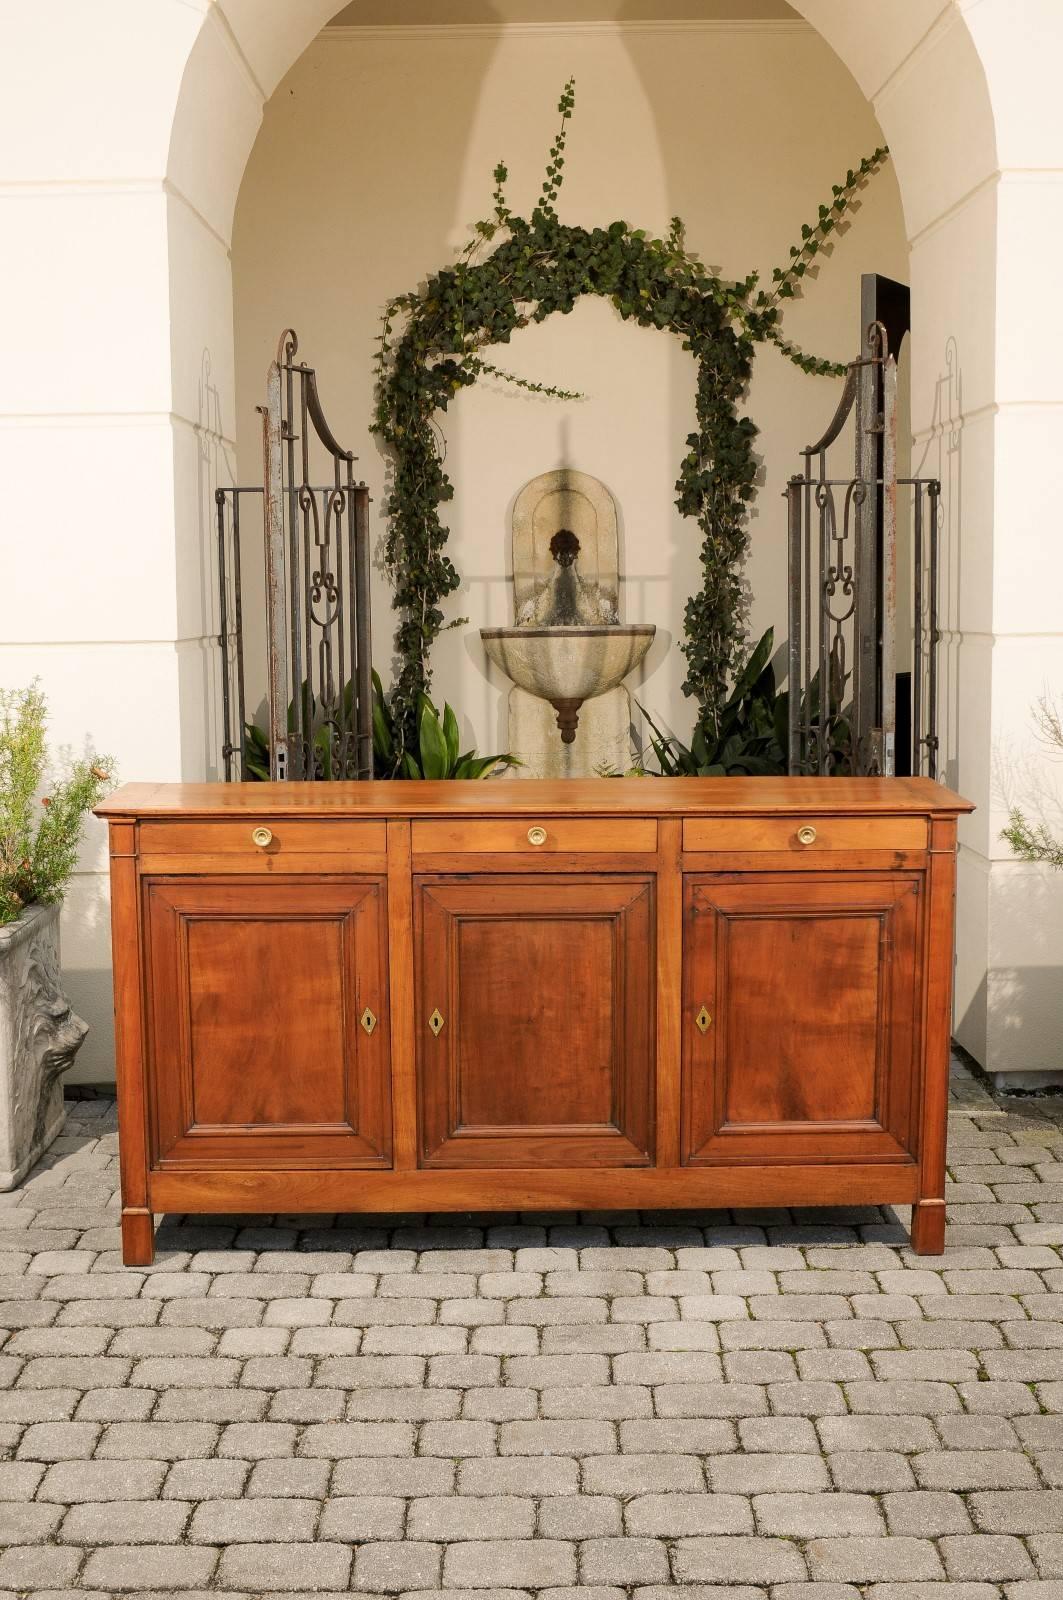 A French narrow wooden three-door enfilade with three drawers from the late 19th century. This French wooden enfilade, born in the later years of the 19th century, features a rectangular top with framing planks, sitting above three thin drawers with